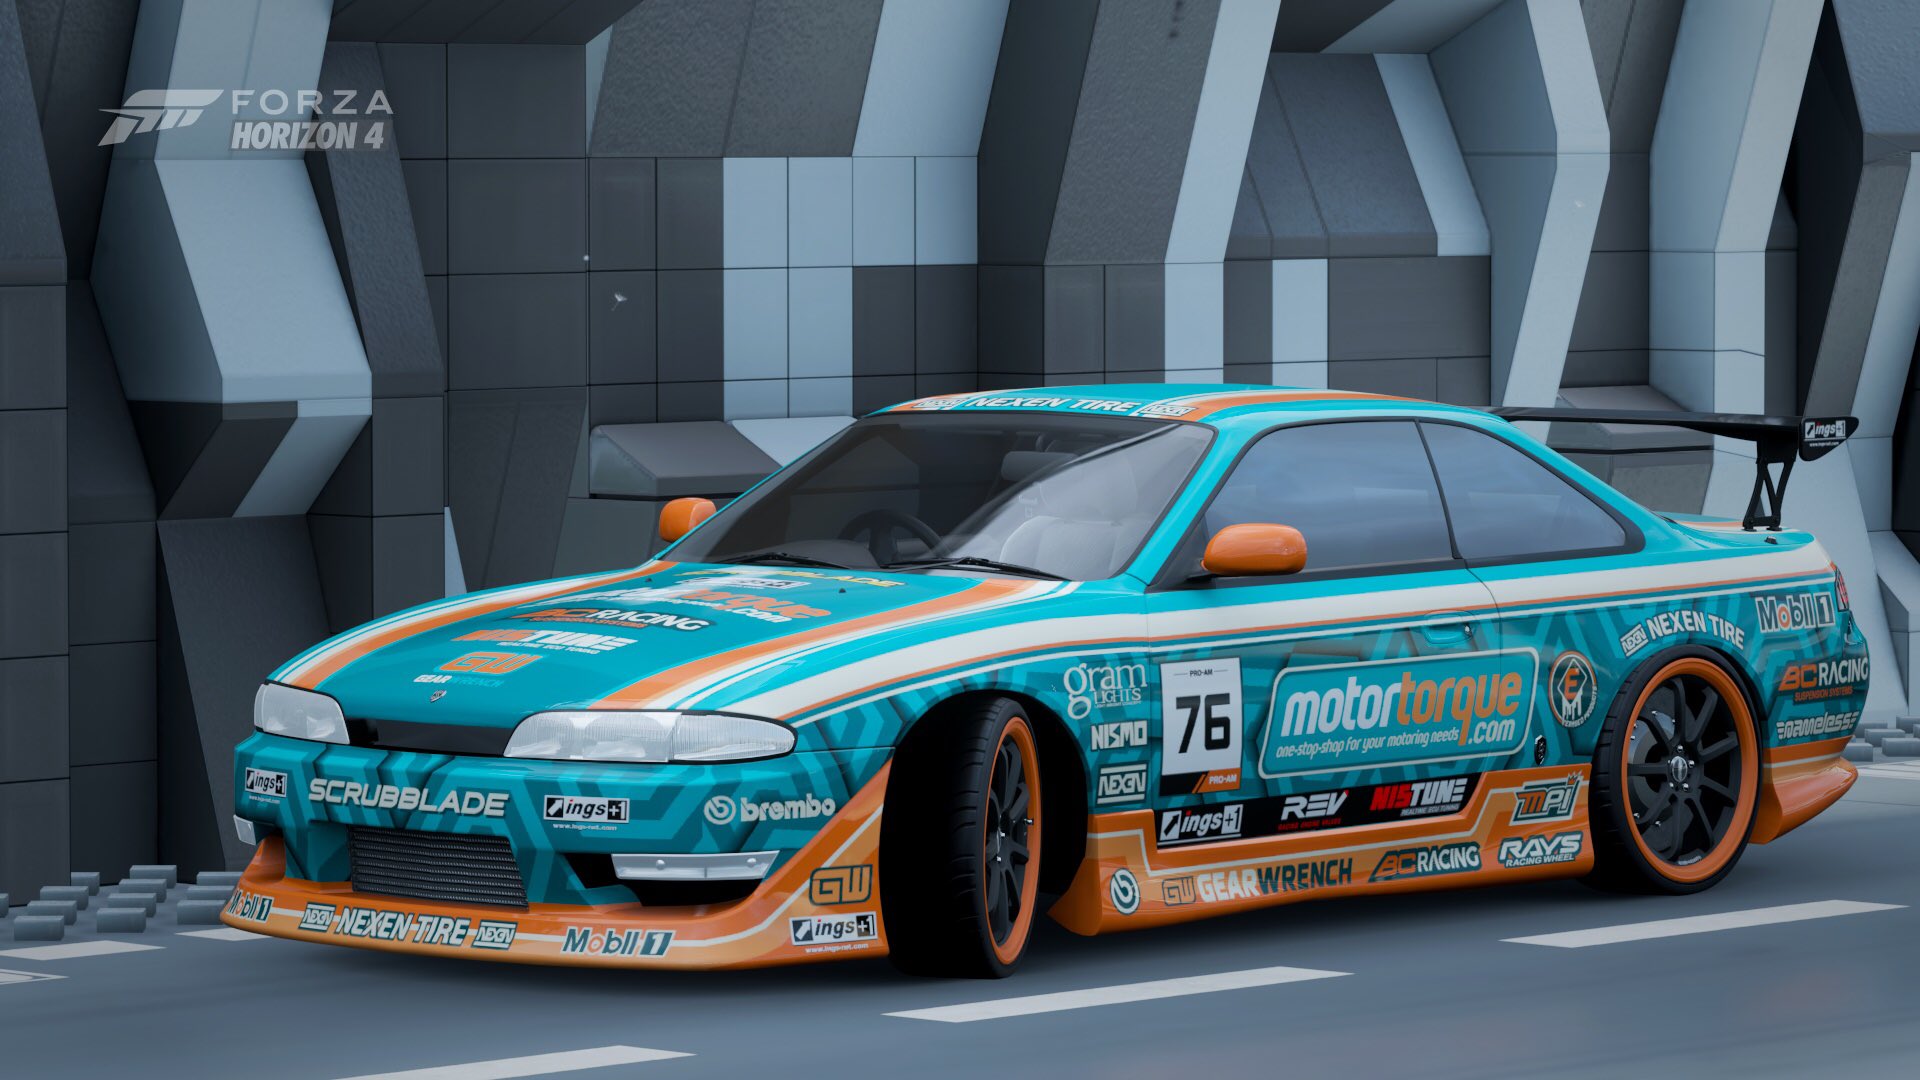 Honz12 Fictional Livery For The 1994 Nissan Silvia K S Shared On Forzahorizon4 Search For Honz12 Needs The Full Ings Body Kit Forza Forzapainter Forzatography Forzashare T Co Oimwjdqsvh Twitter